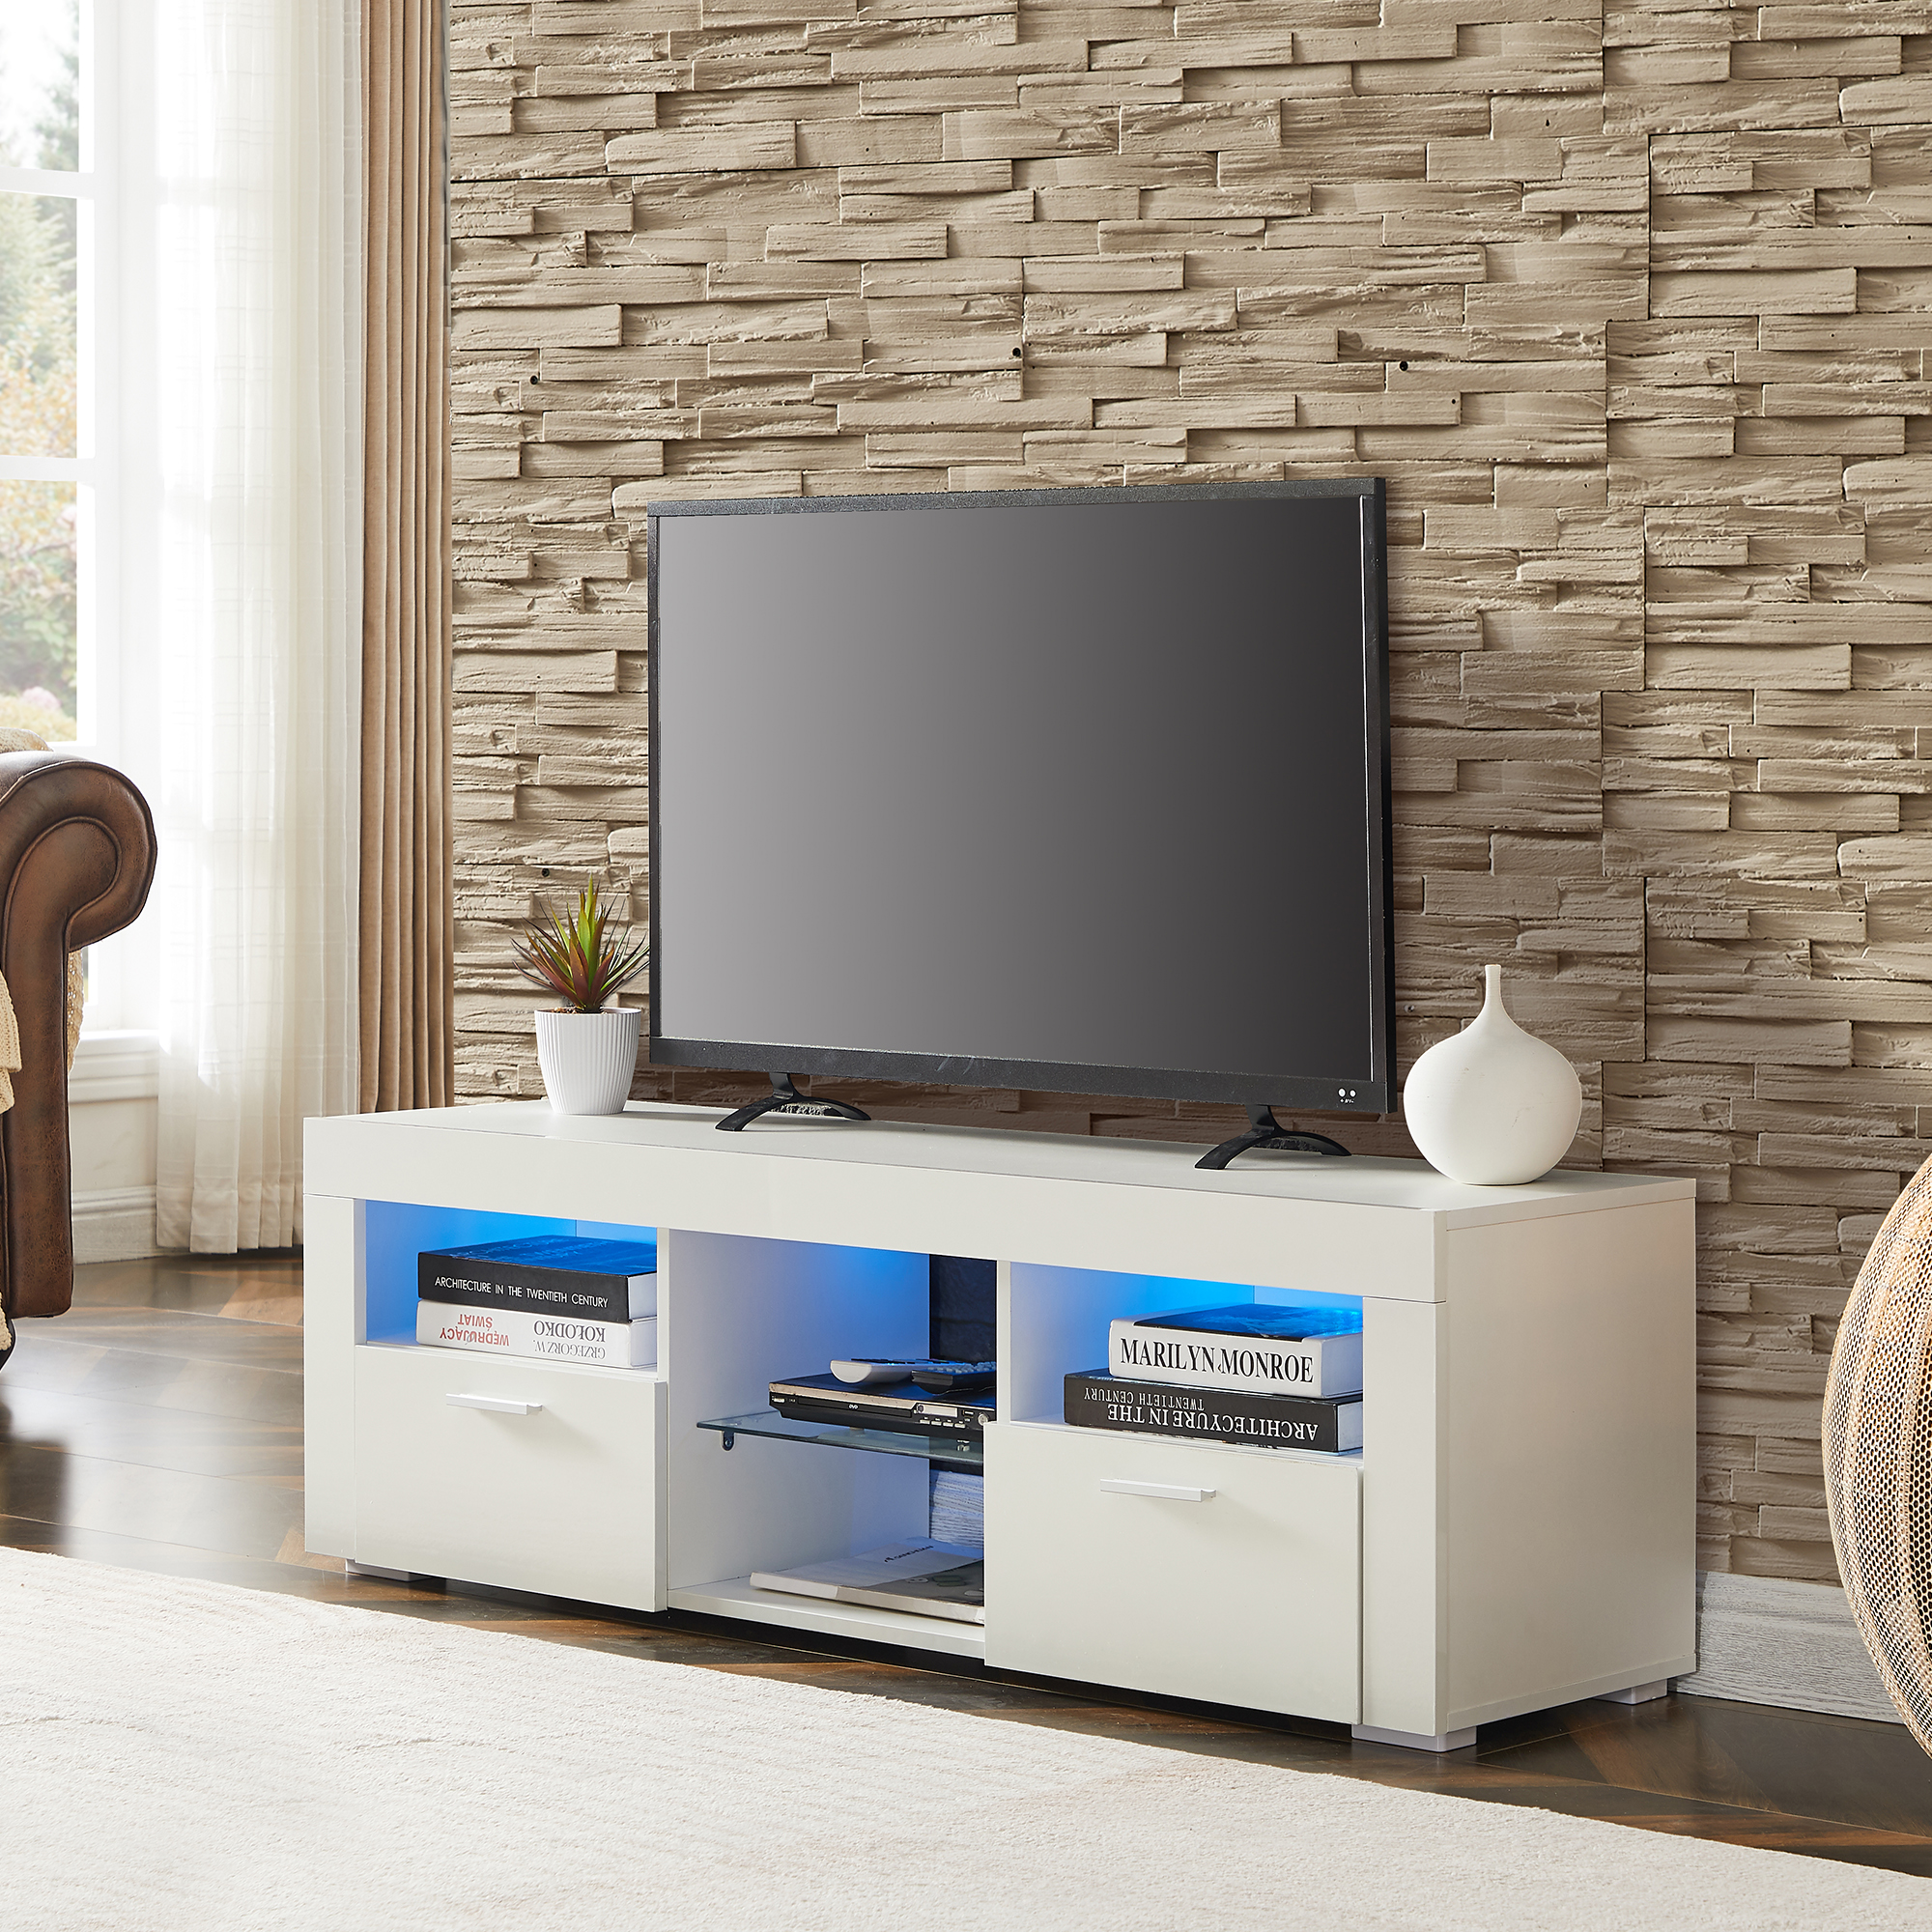 White morden TV Stand with LED Lights,high glossy front TV Cabinet,can be assembled in Lounge Room, Living Room or Bedroom,color:WHITE-Boyel Living